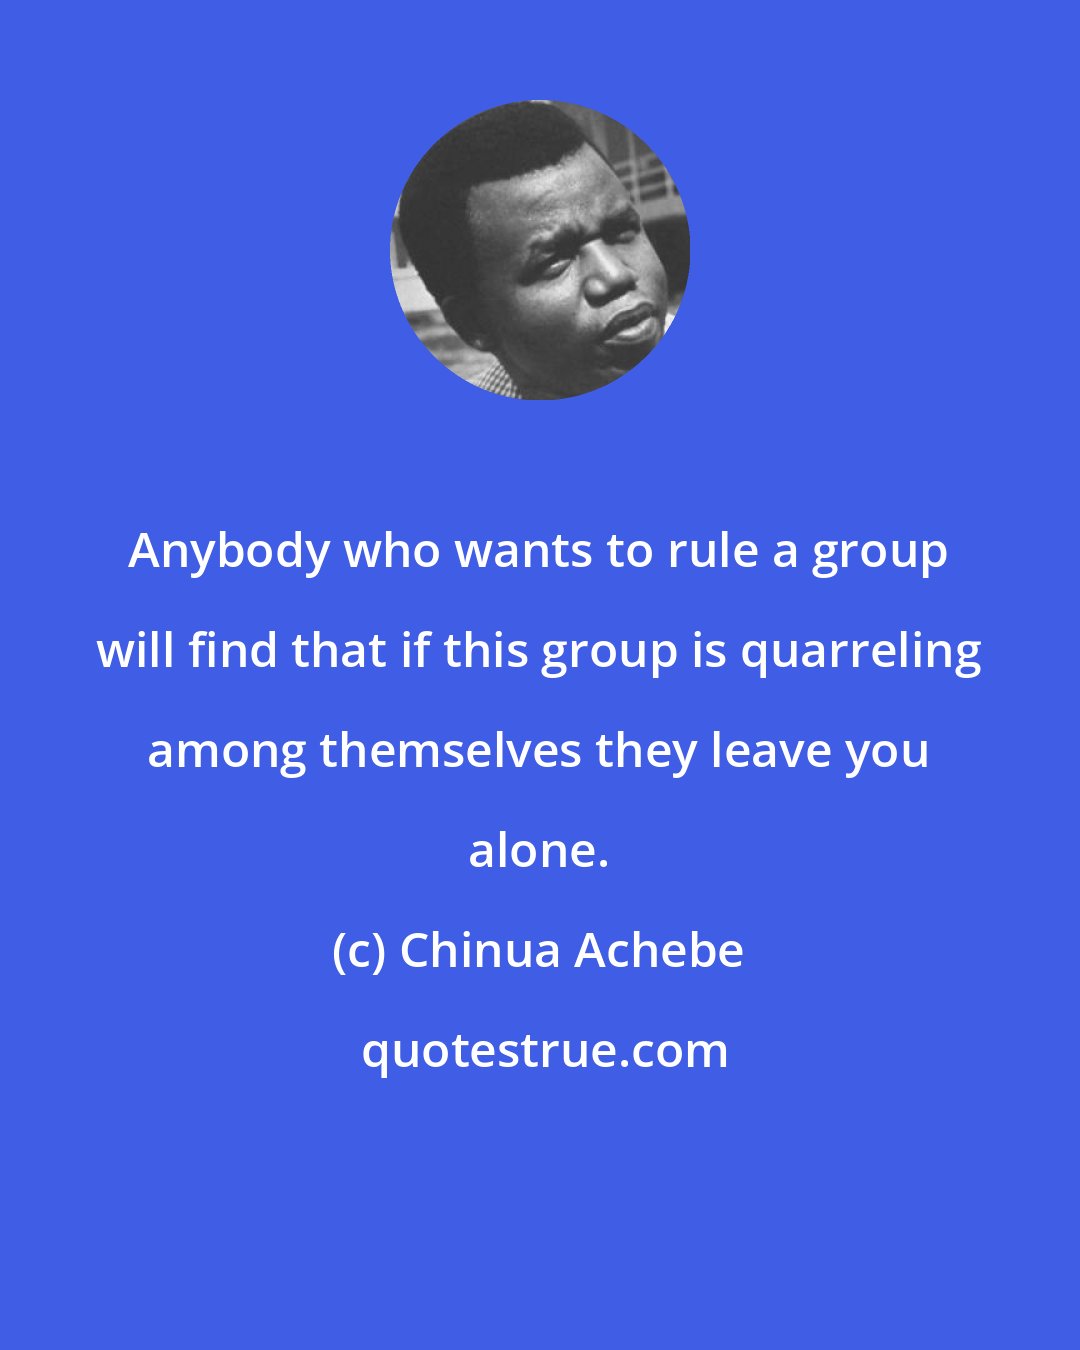 Chinua Achebe: Anybody who wants to rule a group will find that if this group is quarreling among themselves they leave you alone.